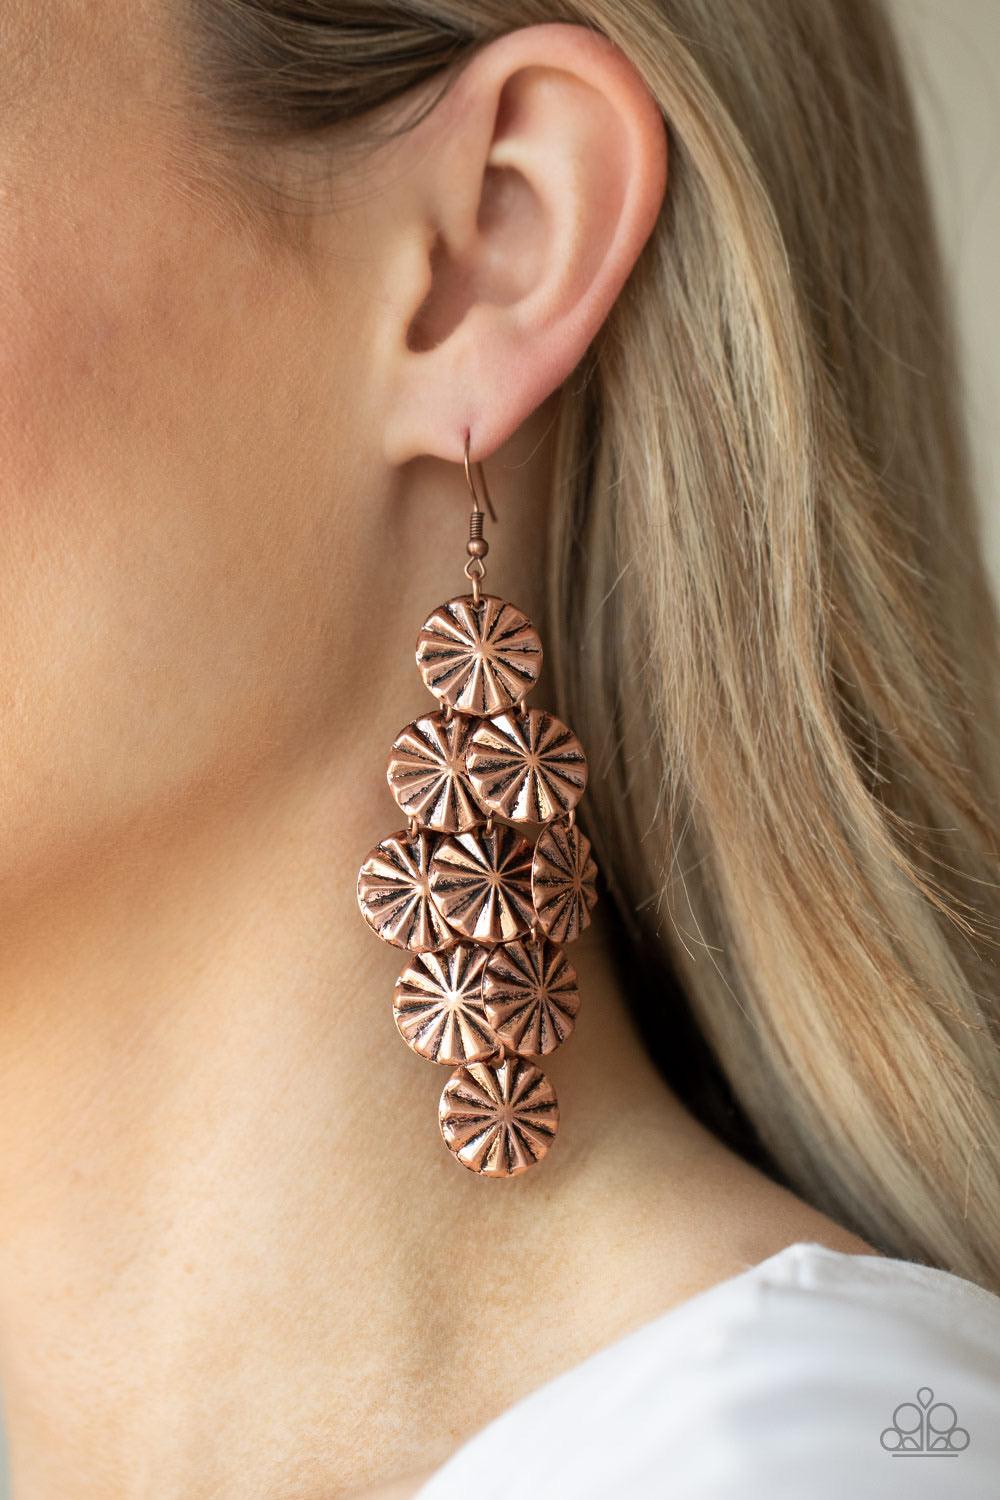 Paparazzi Accessories Star Spangled Shine - Copper Creased in star-like patterns, antiqued copper discs attach to a copper netted backdrop, linking into an edgy lure. Earring attaches to a standard fishhook fitting. Sold as one pair of earrings. Jewelry